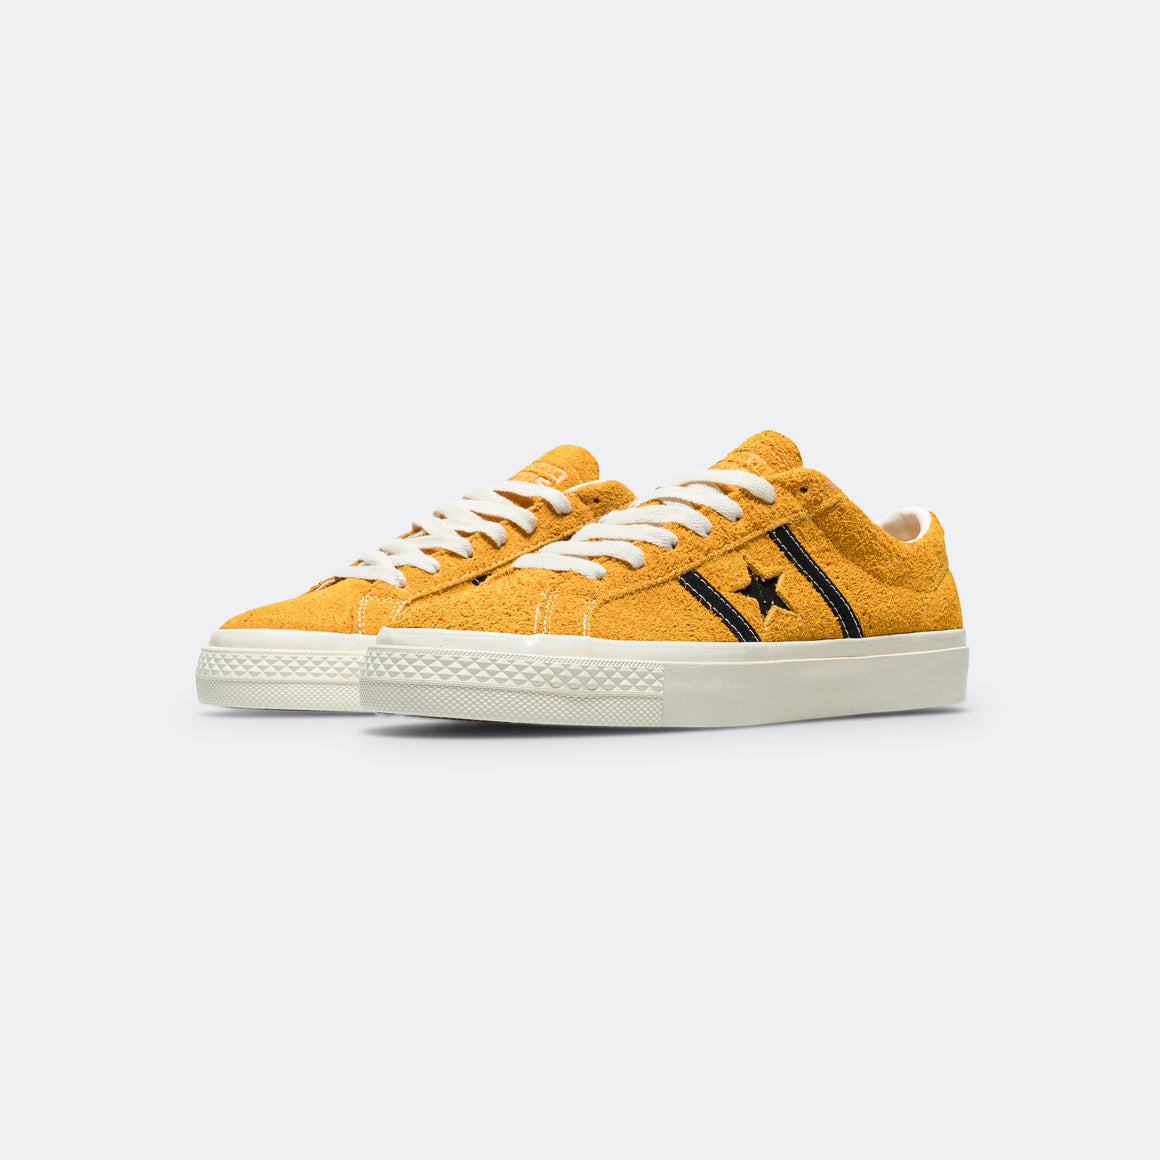 Converse - One Star Academy Pro Low - Sunflower Gold/Black-Egret - UP THERE